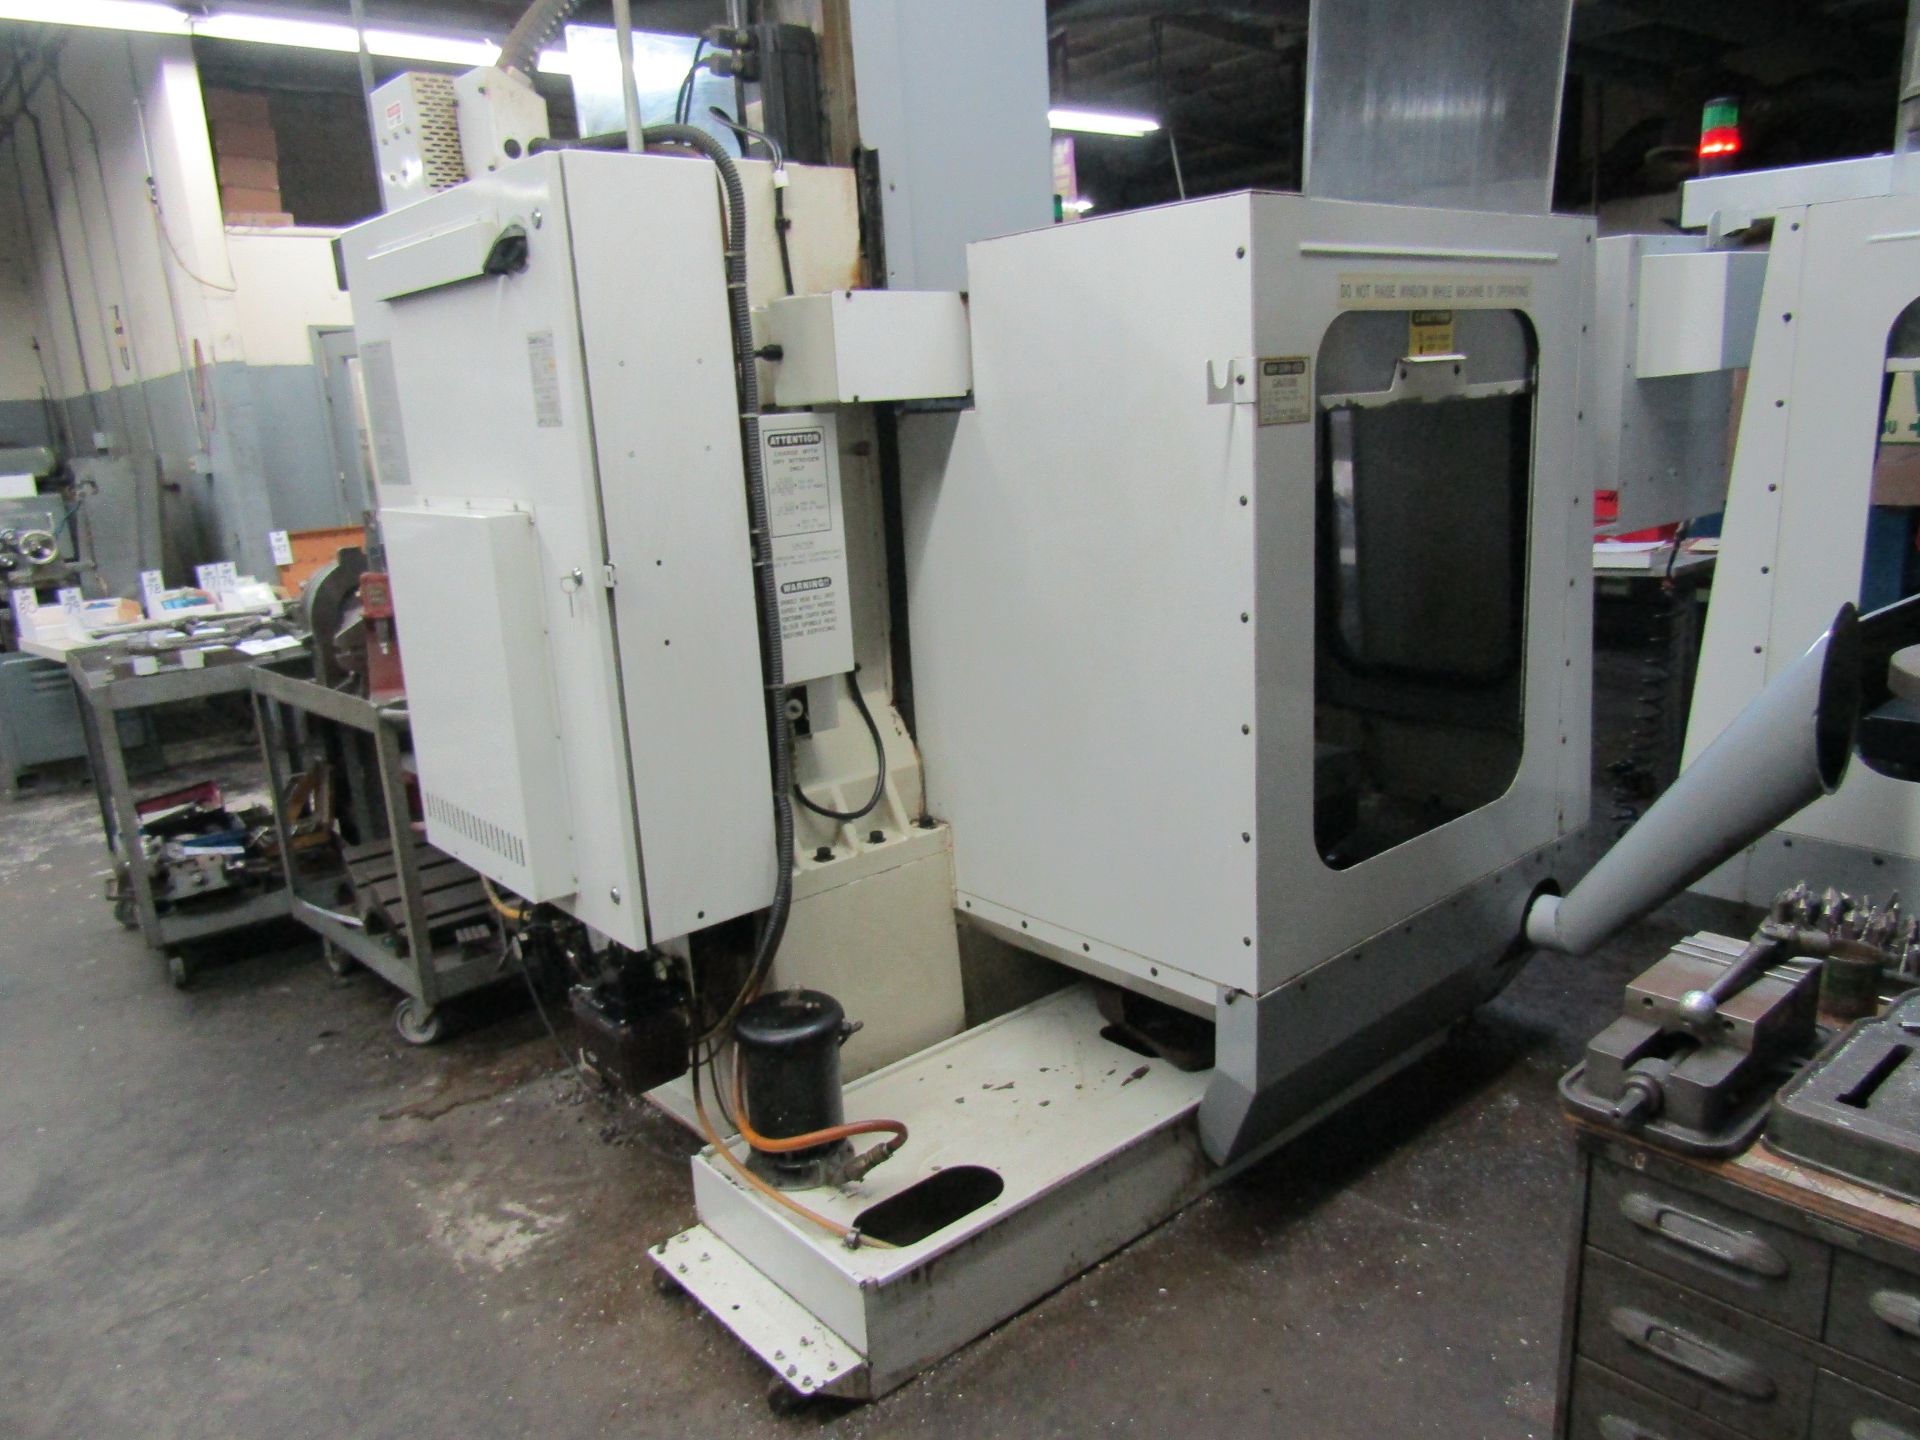 1997 HAAS VF-1 VERTICAL MACHINING CENTER TRAVELS: 20 X 16 X 20, HAAS CONTROL – SERIAL#: 12840 - Image 10 of 11